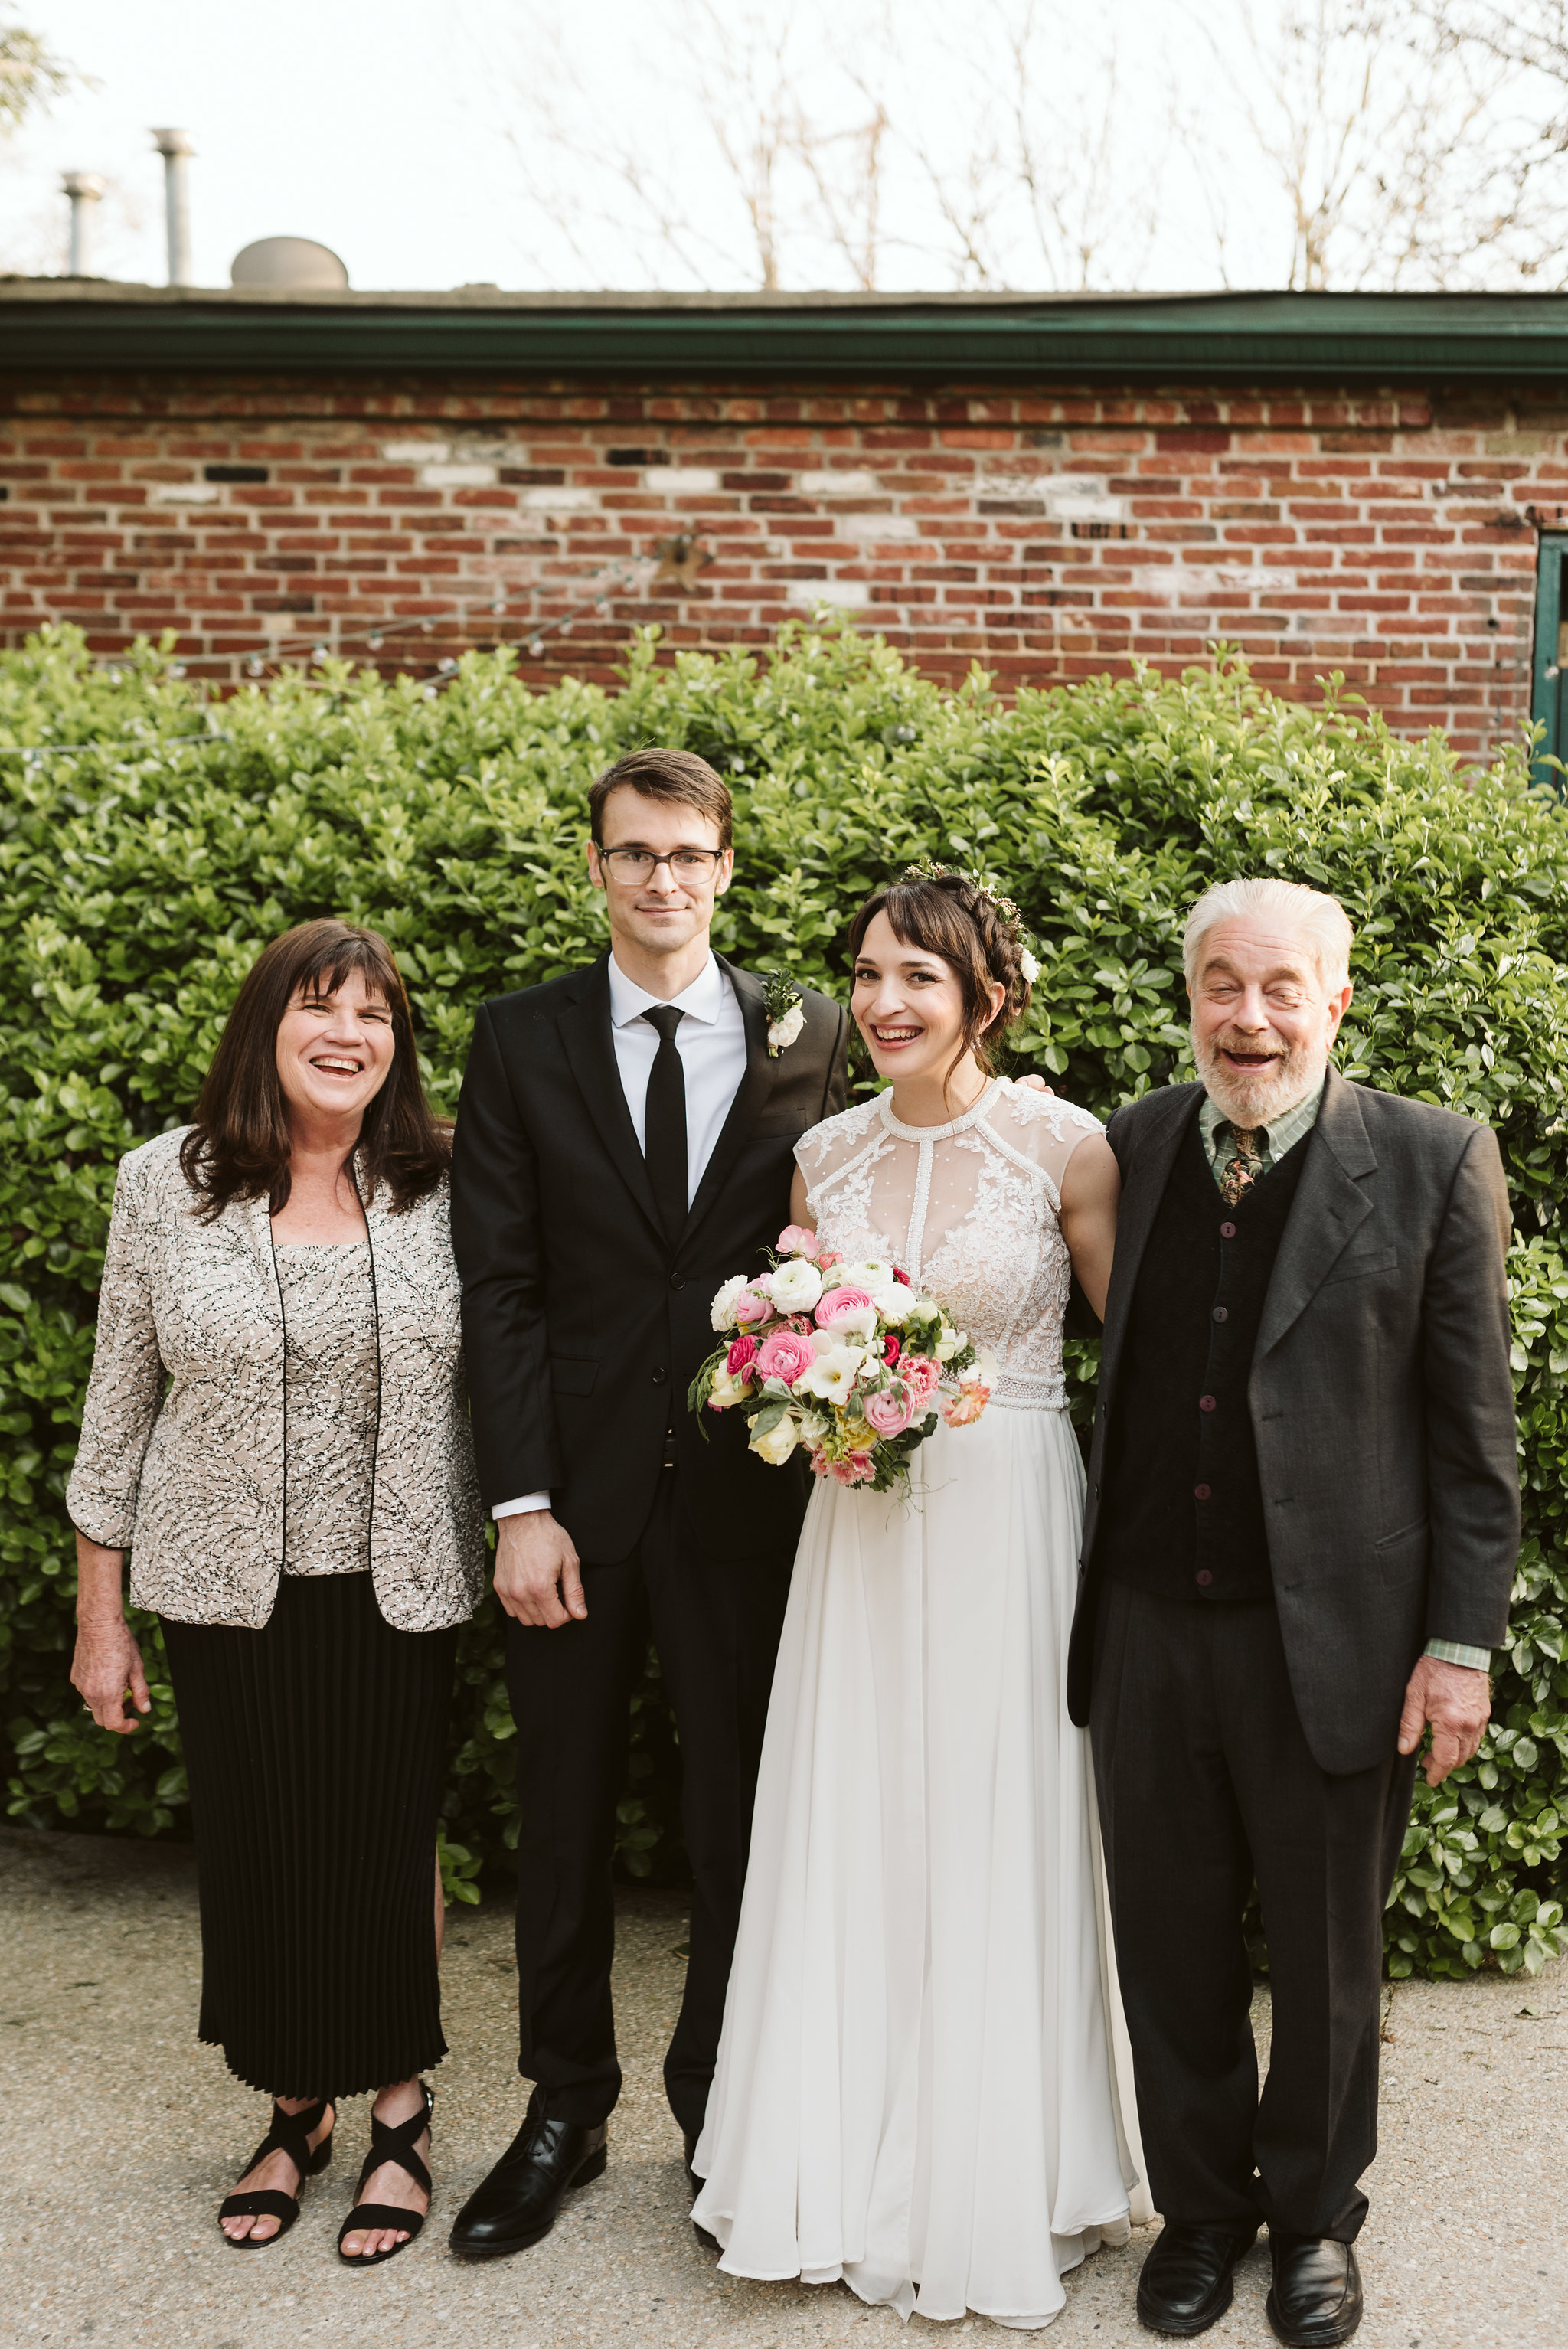  Baltimore, Maryland Wedding Photographer, Hampden, Eco-Friendly, Green, The Elm, Simple and Classic, Vintage, Bride and Groom with Parents of the Bride, Smoke and Mirrors Salon 